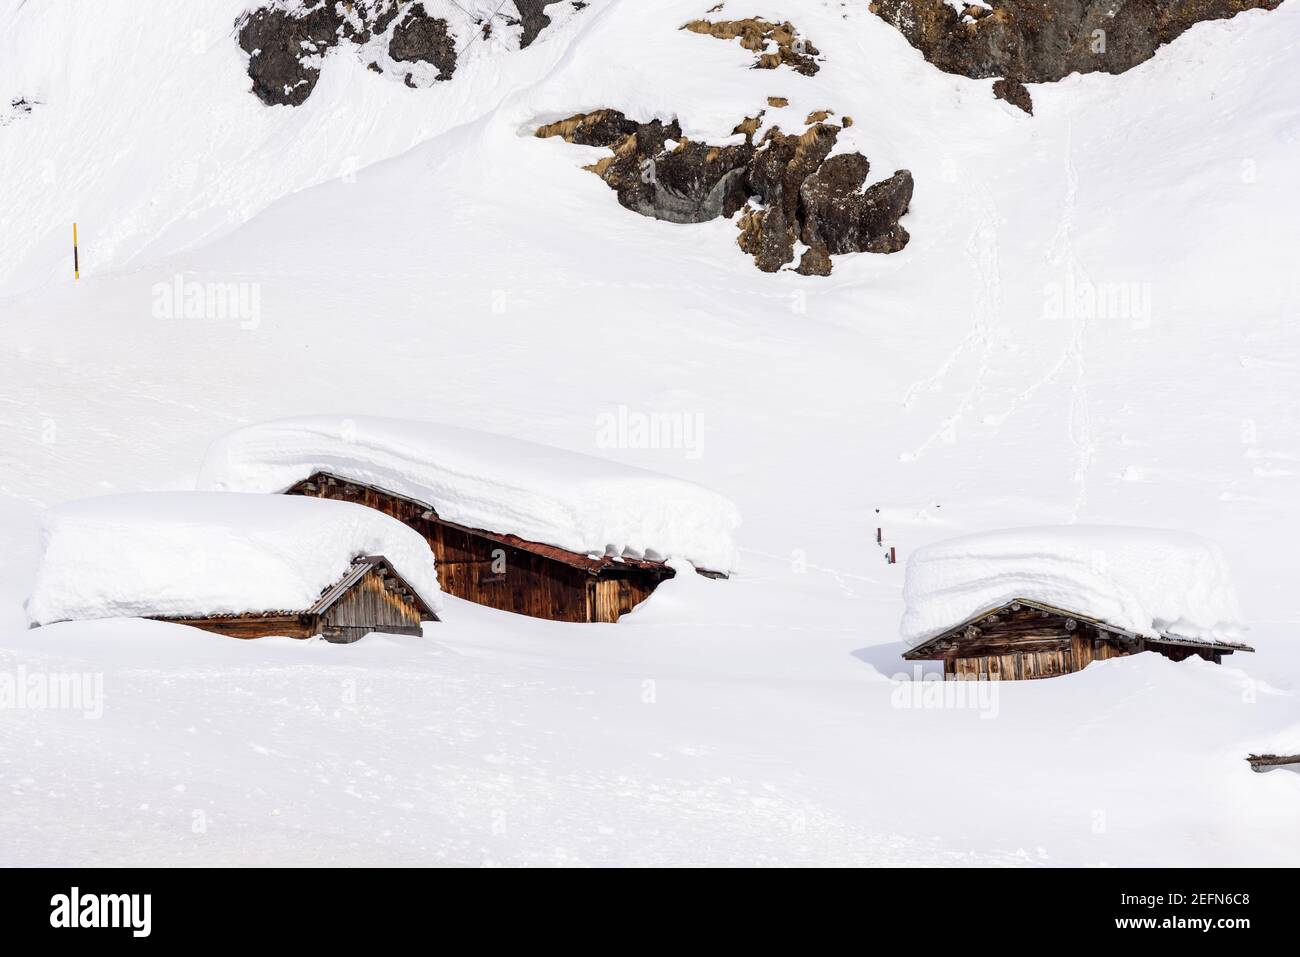 Wooden mountain huts almost completely covered in snow after a heavy snowfall in the Europeans Alps Stock Photo